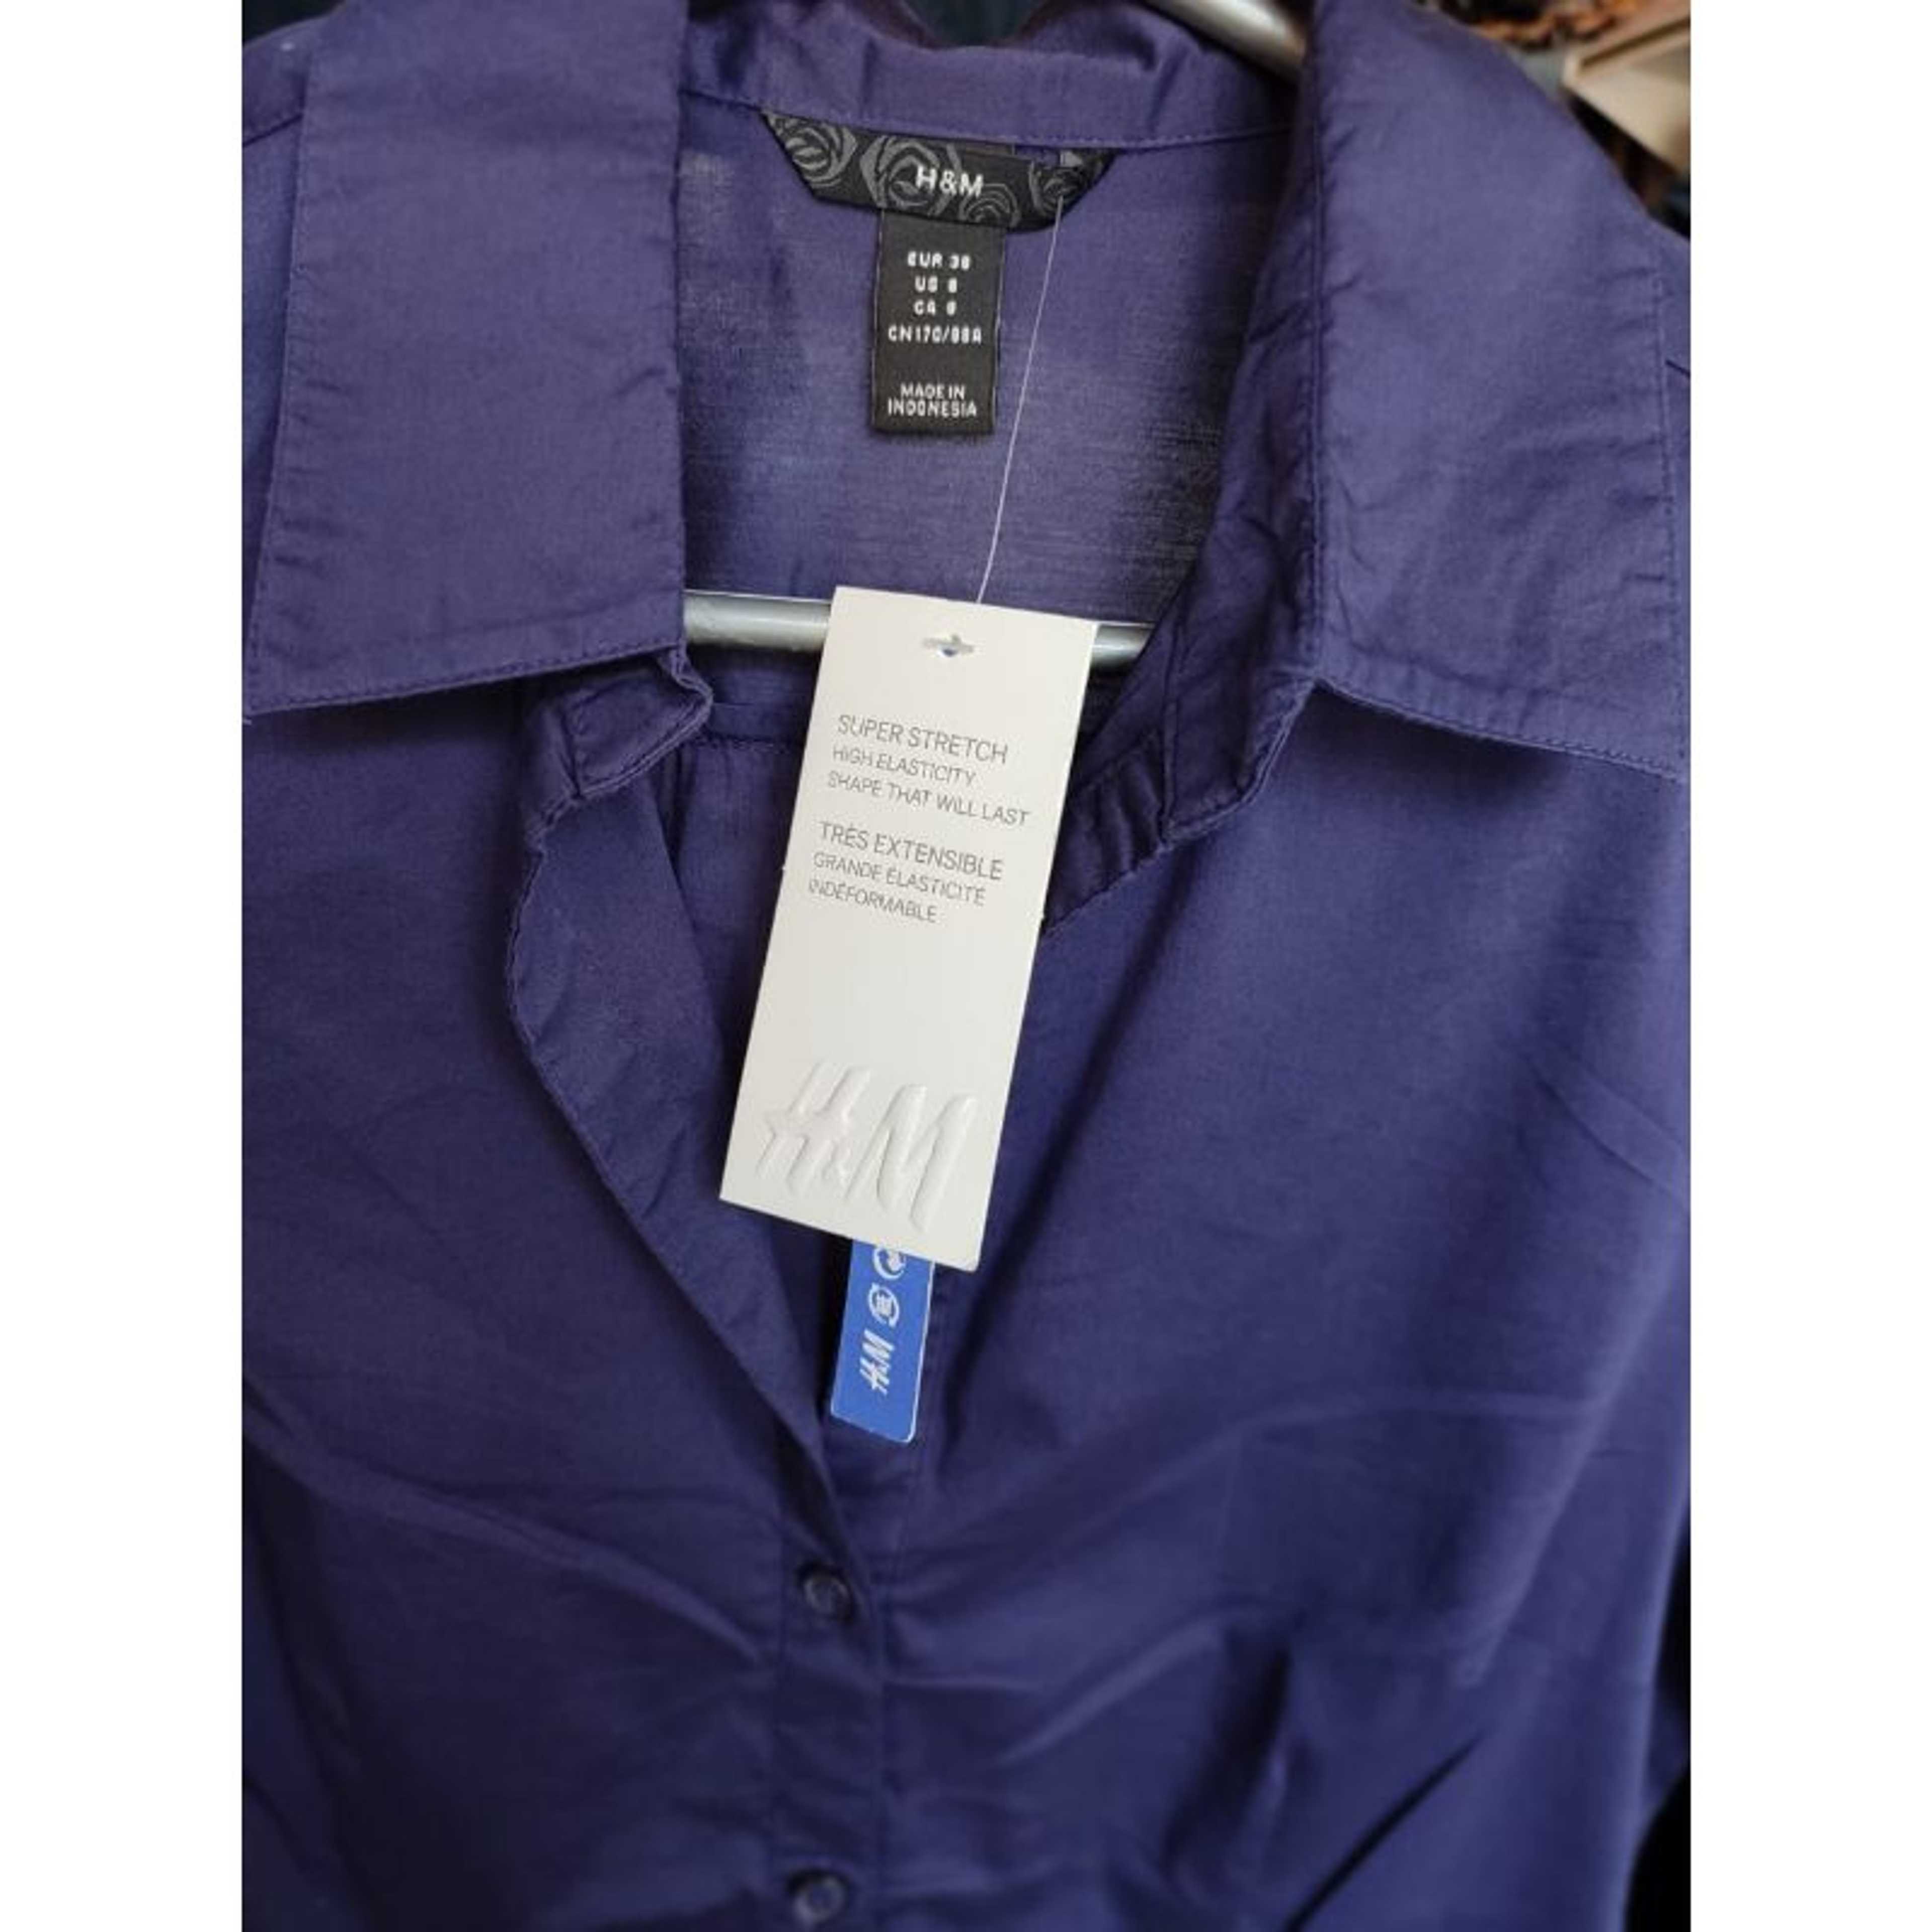 Girls formal shirts in Purple color